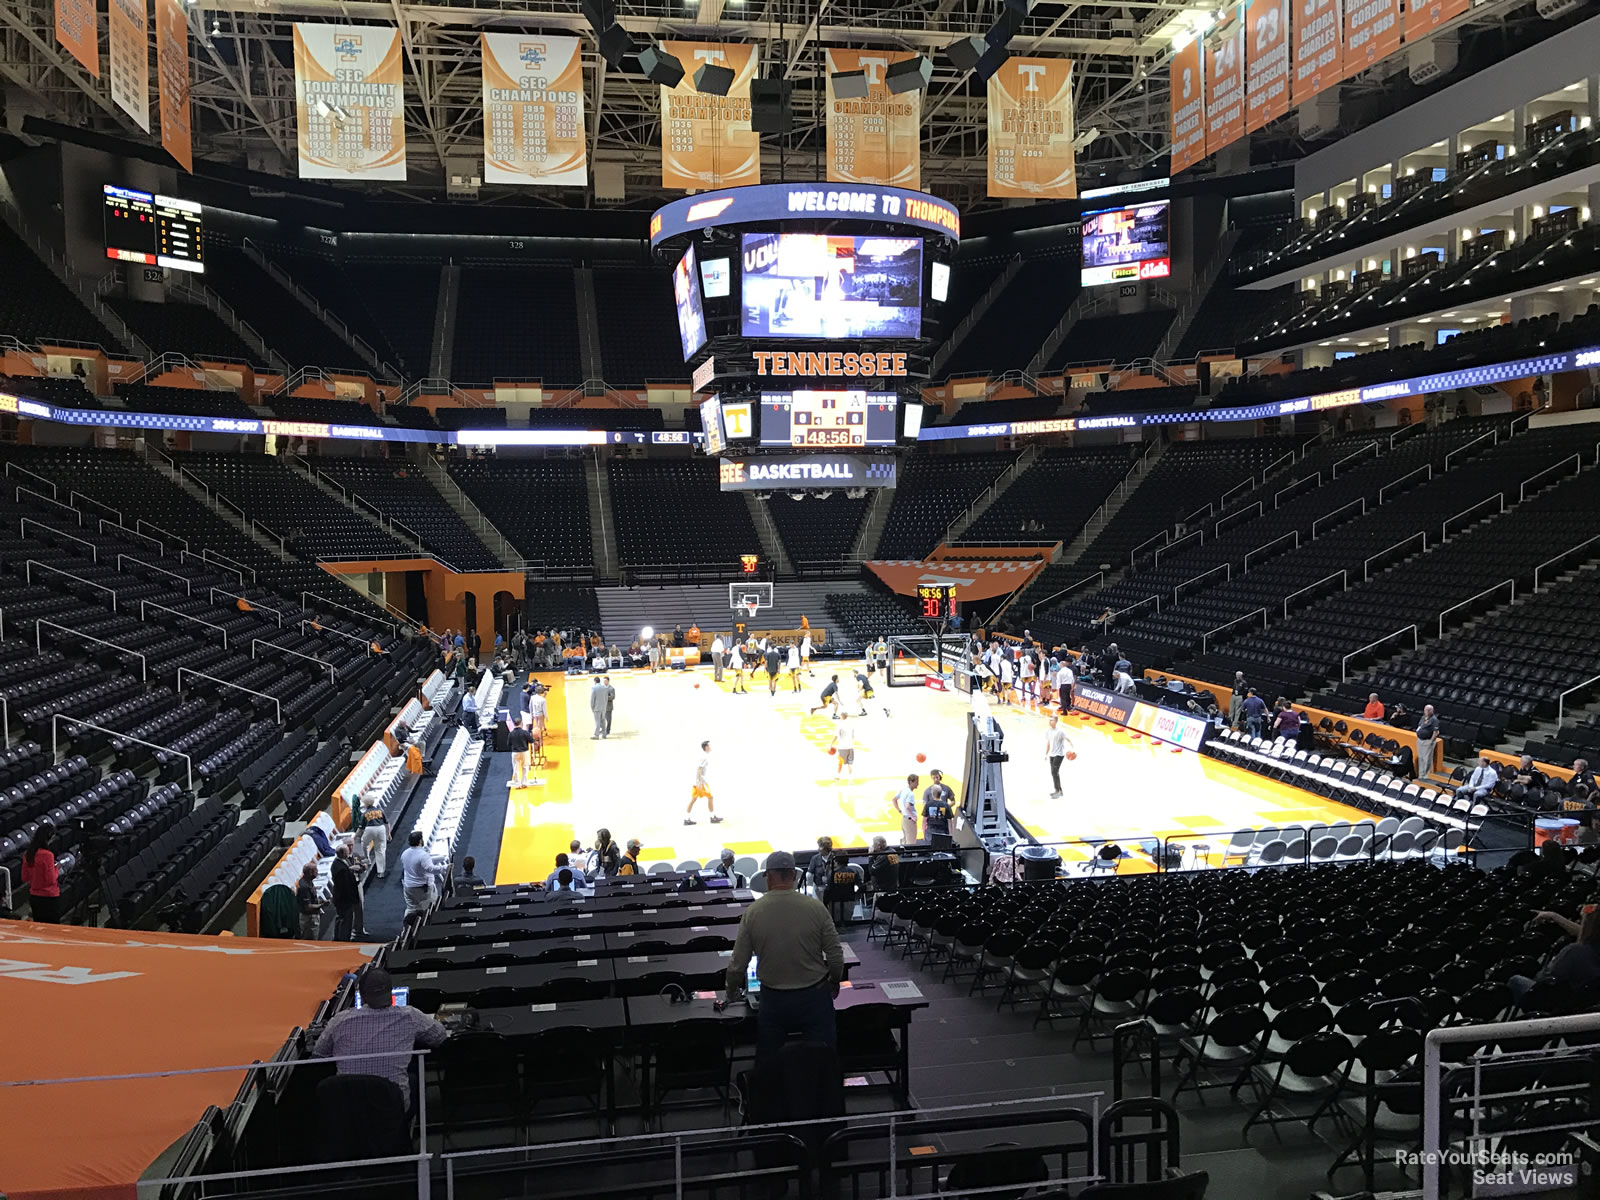 section 114, row 17 seat view  - thompson-boling arena